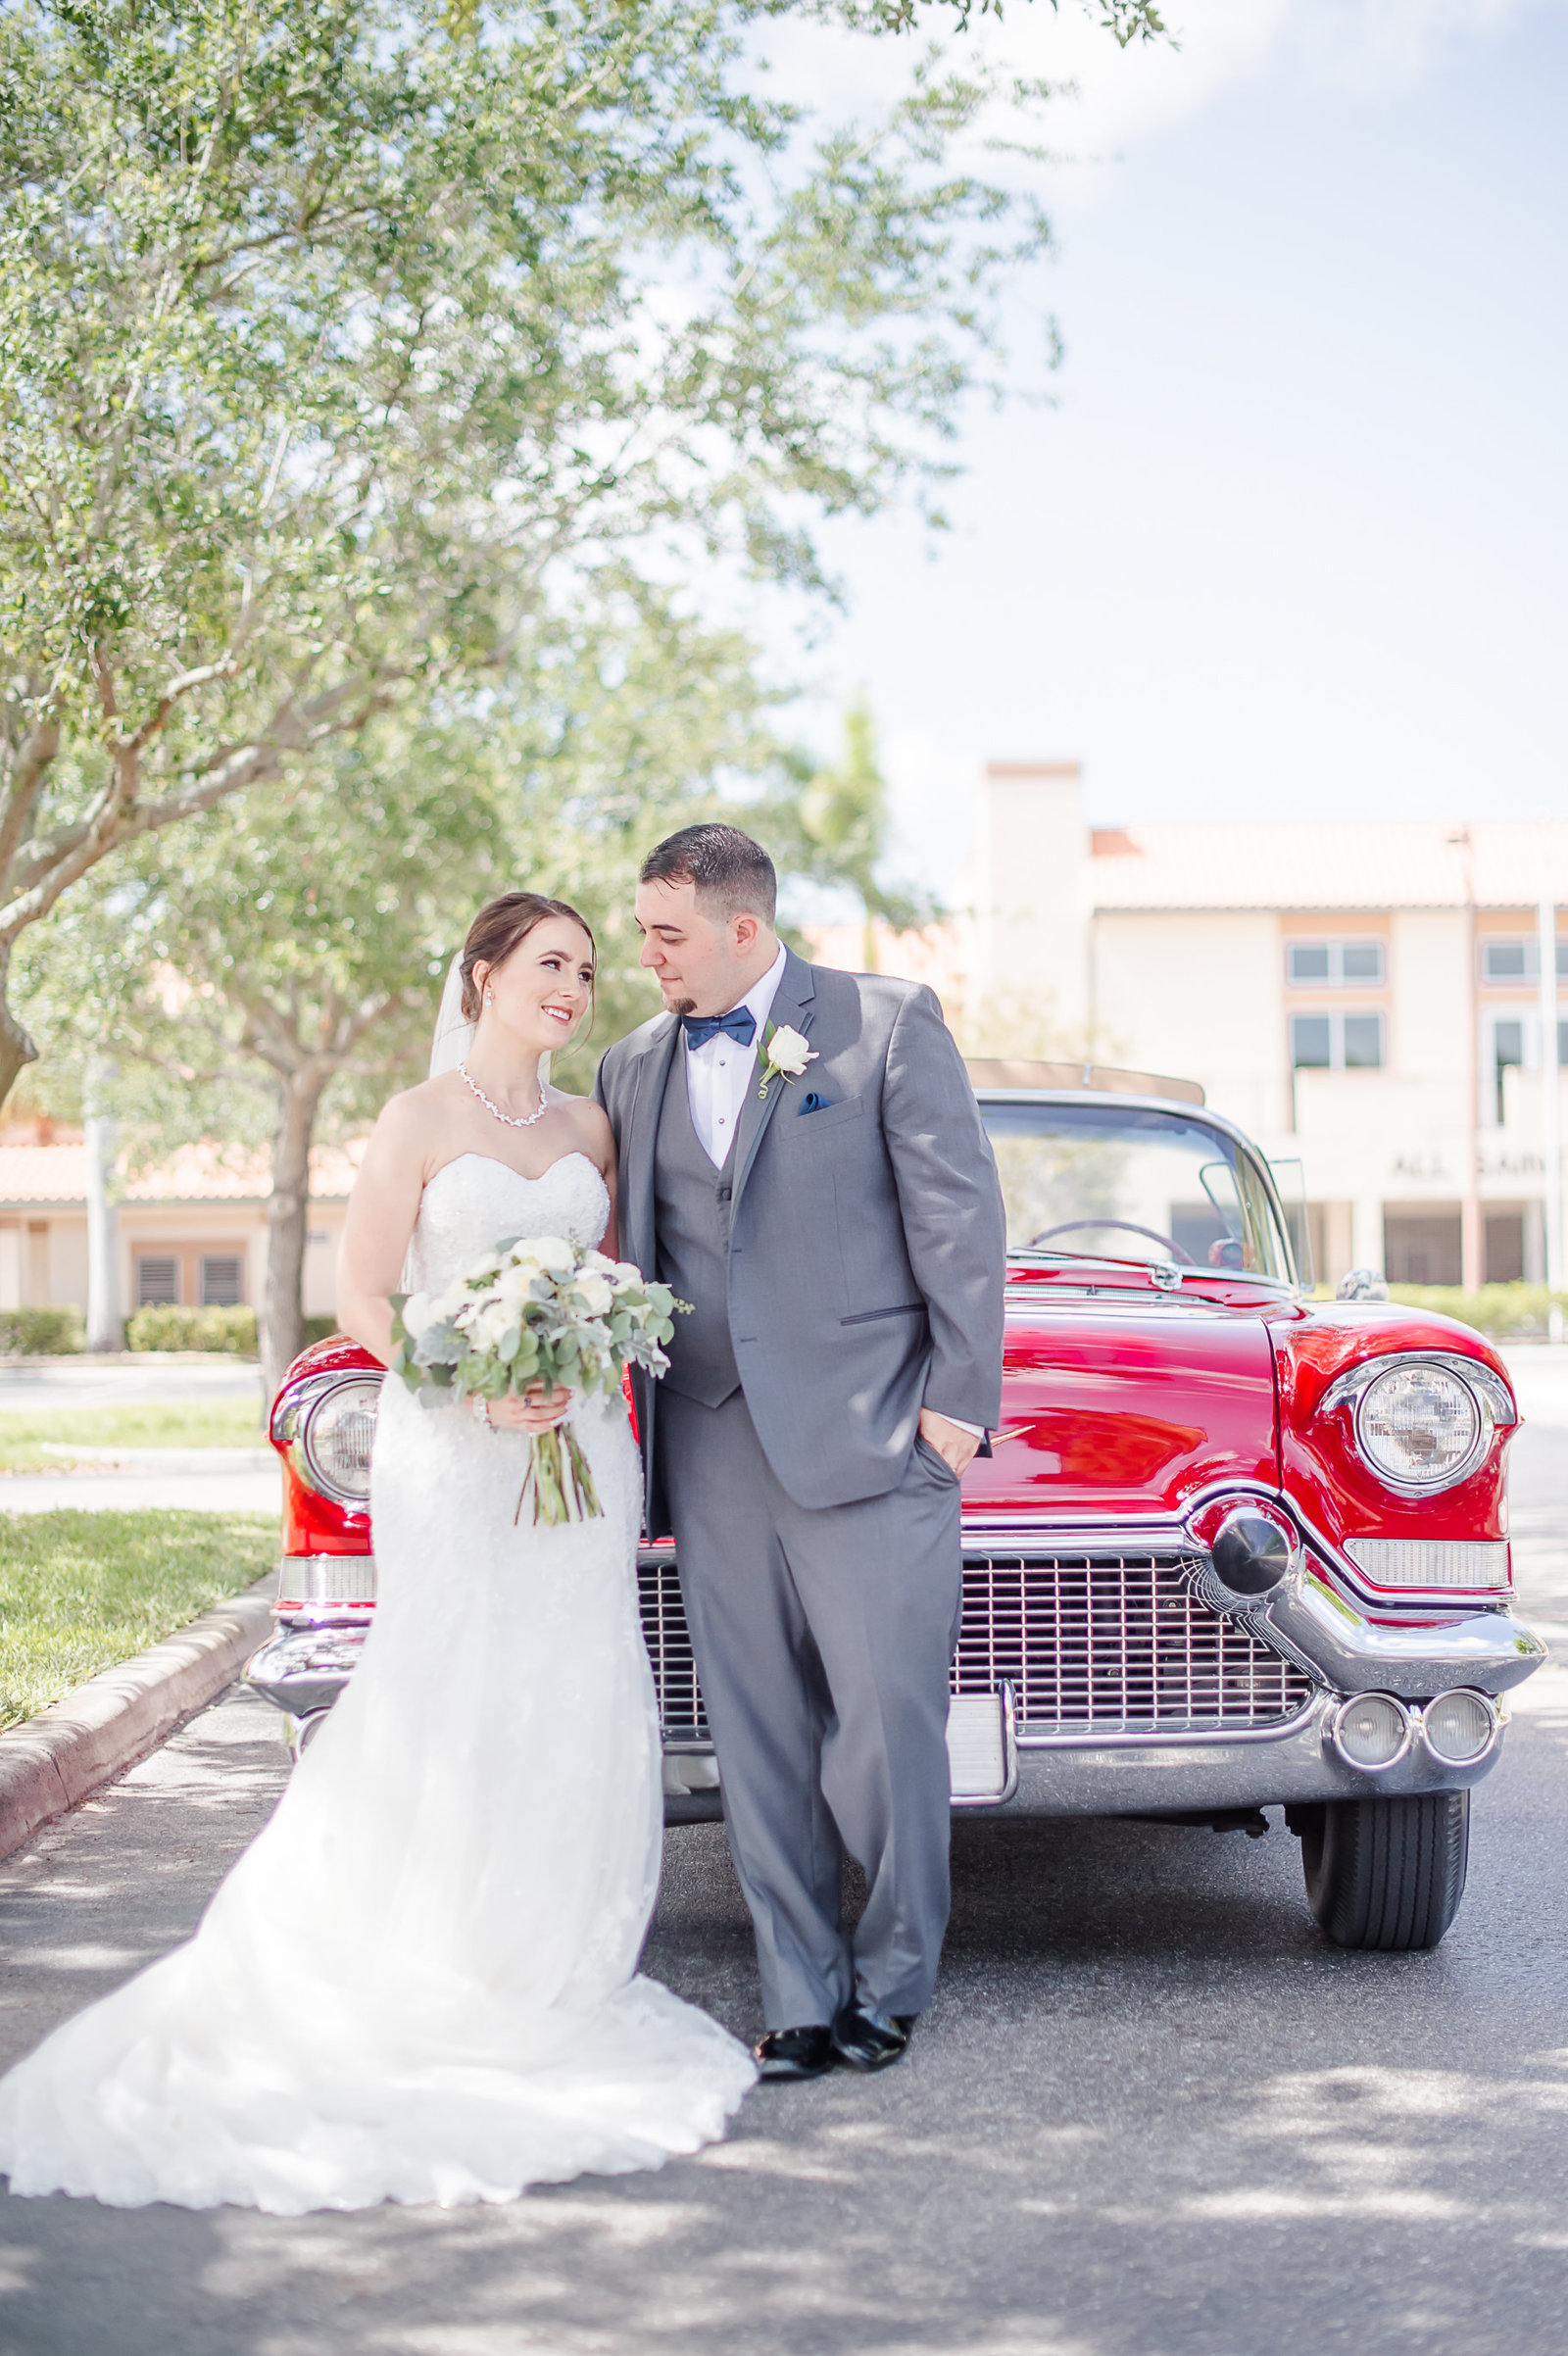 Newlywed in red classic car - Country Club at Mirasol Wedding - Palm Beach Wedding Photography by Palm Beach Photography, Inc.